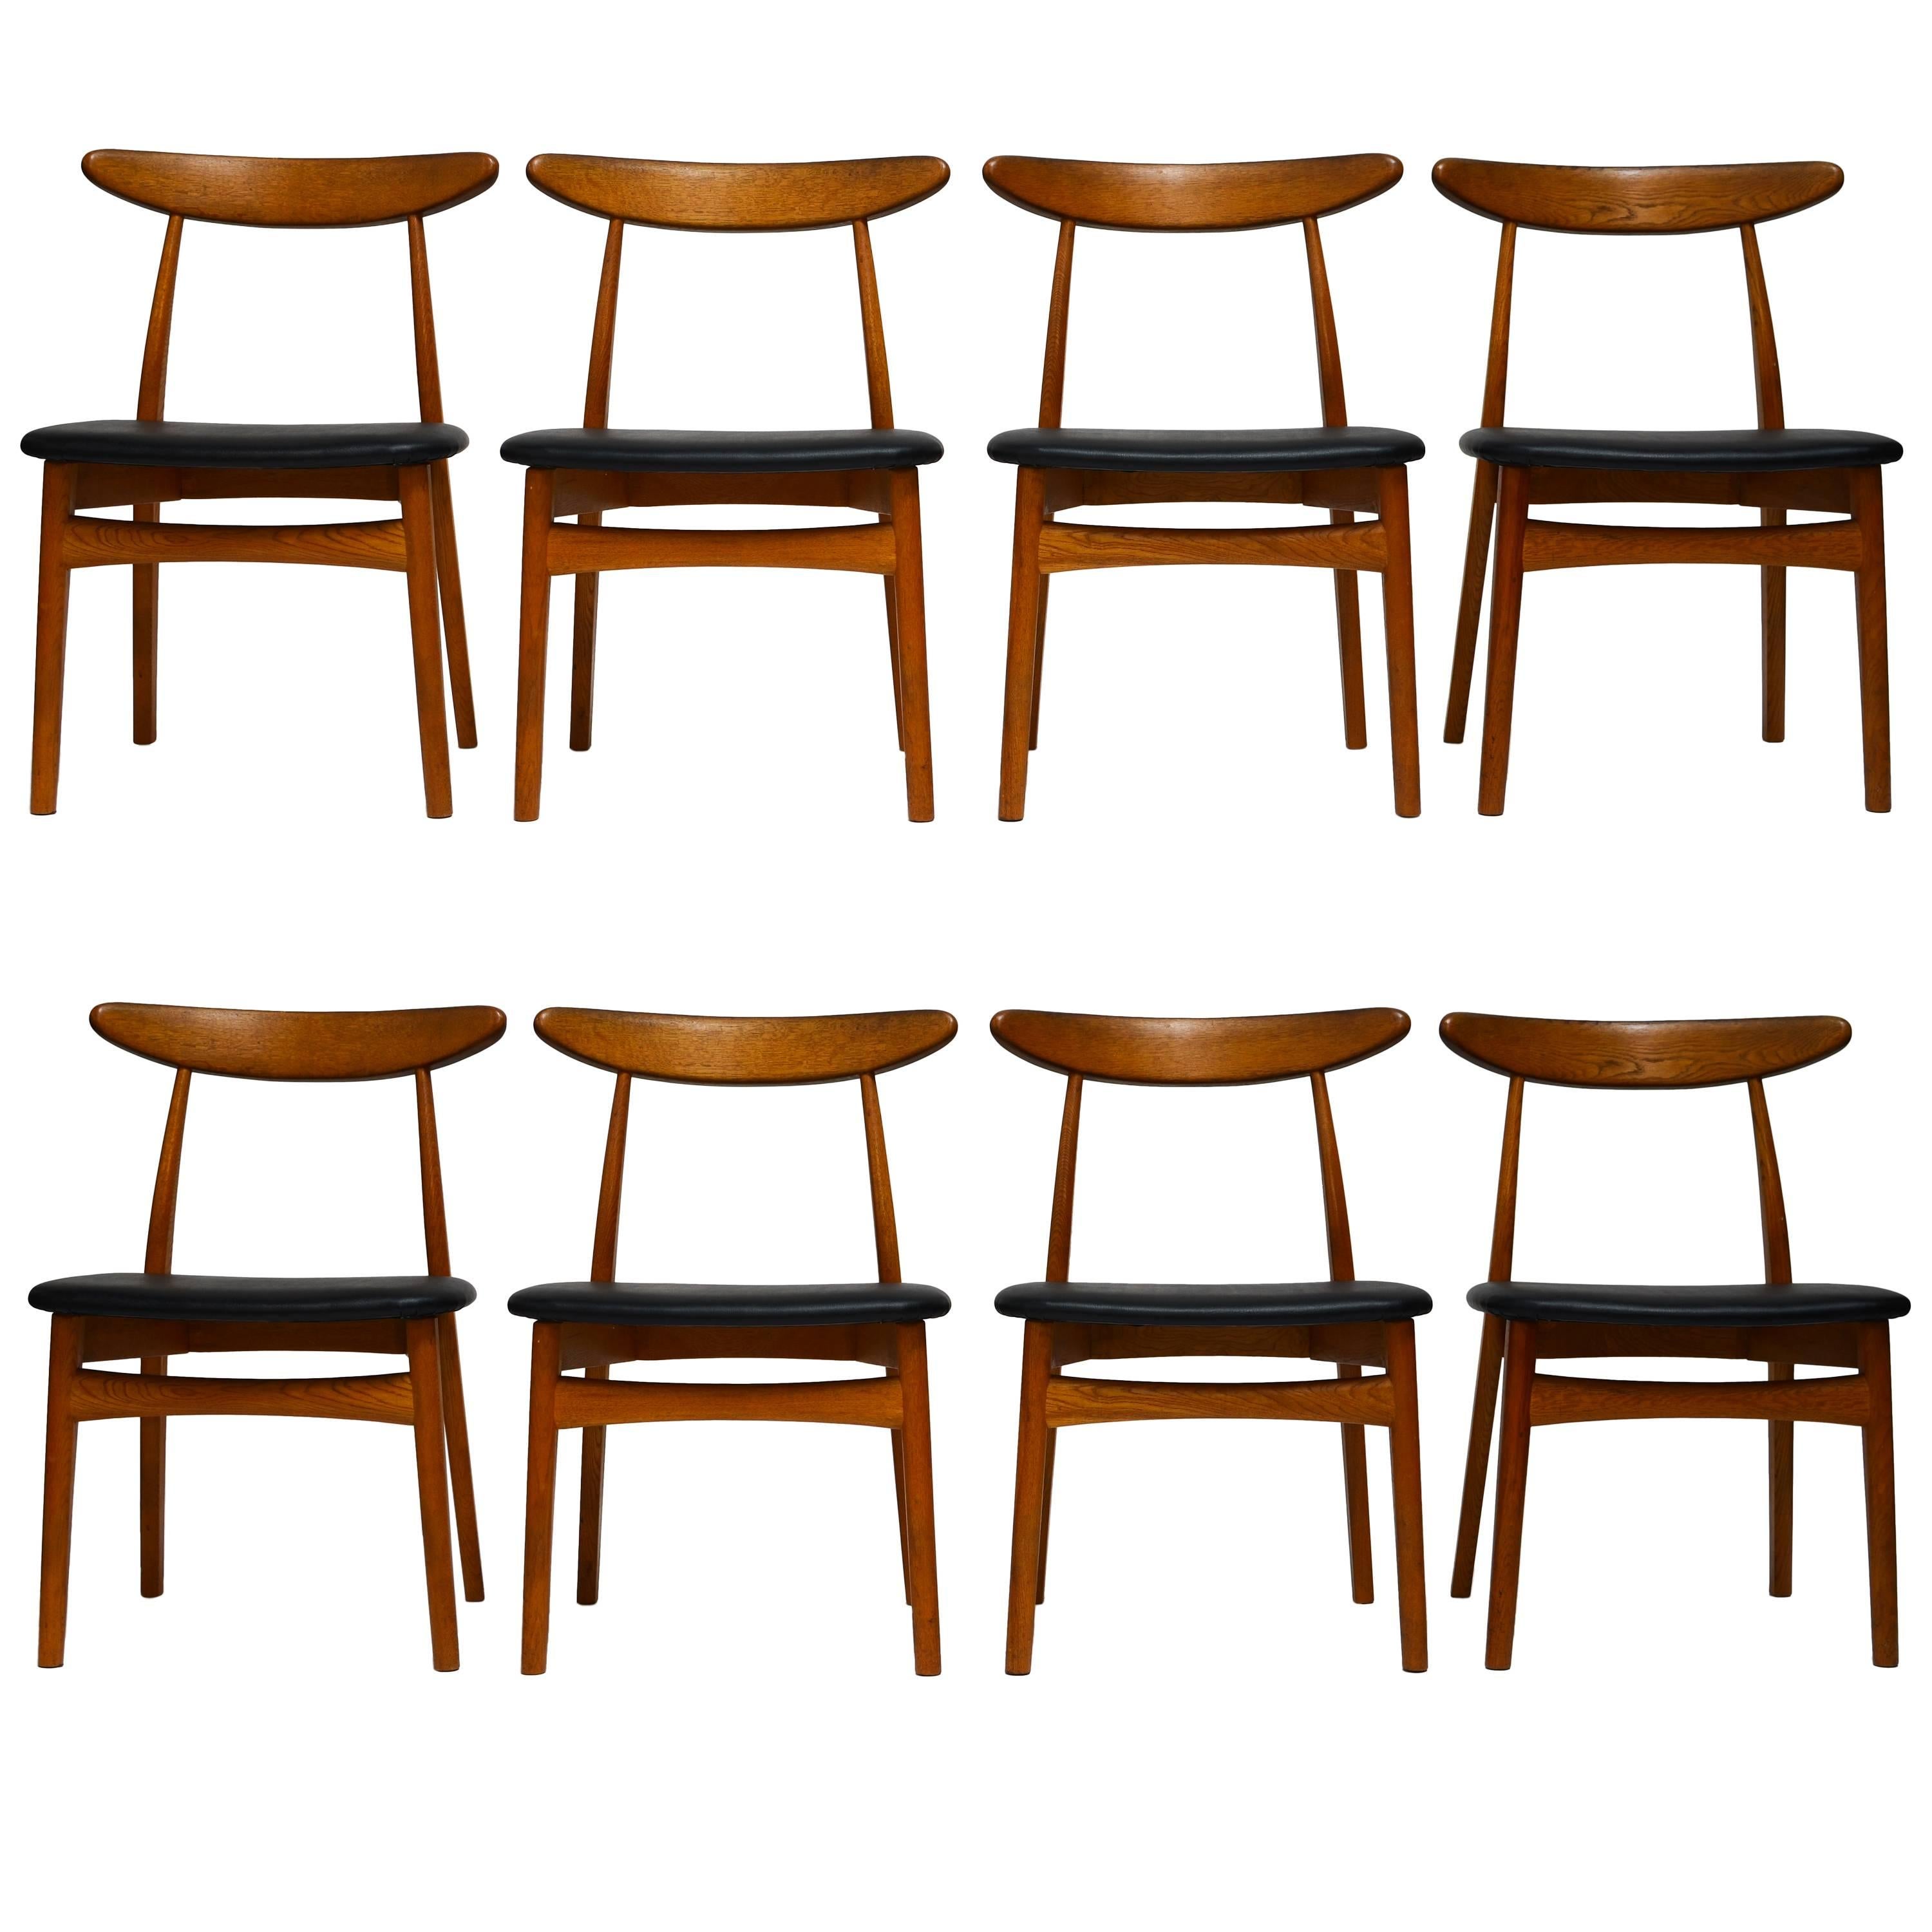 Japanese Modern Midcentury Dining Chairs  For Sale